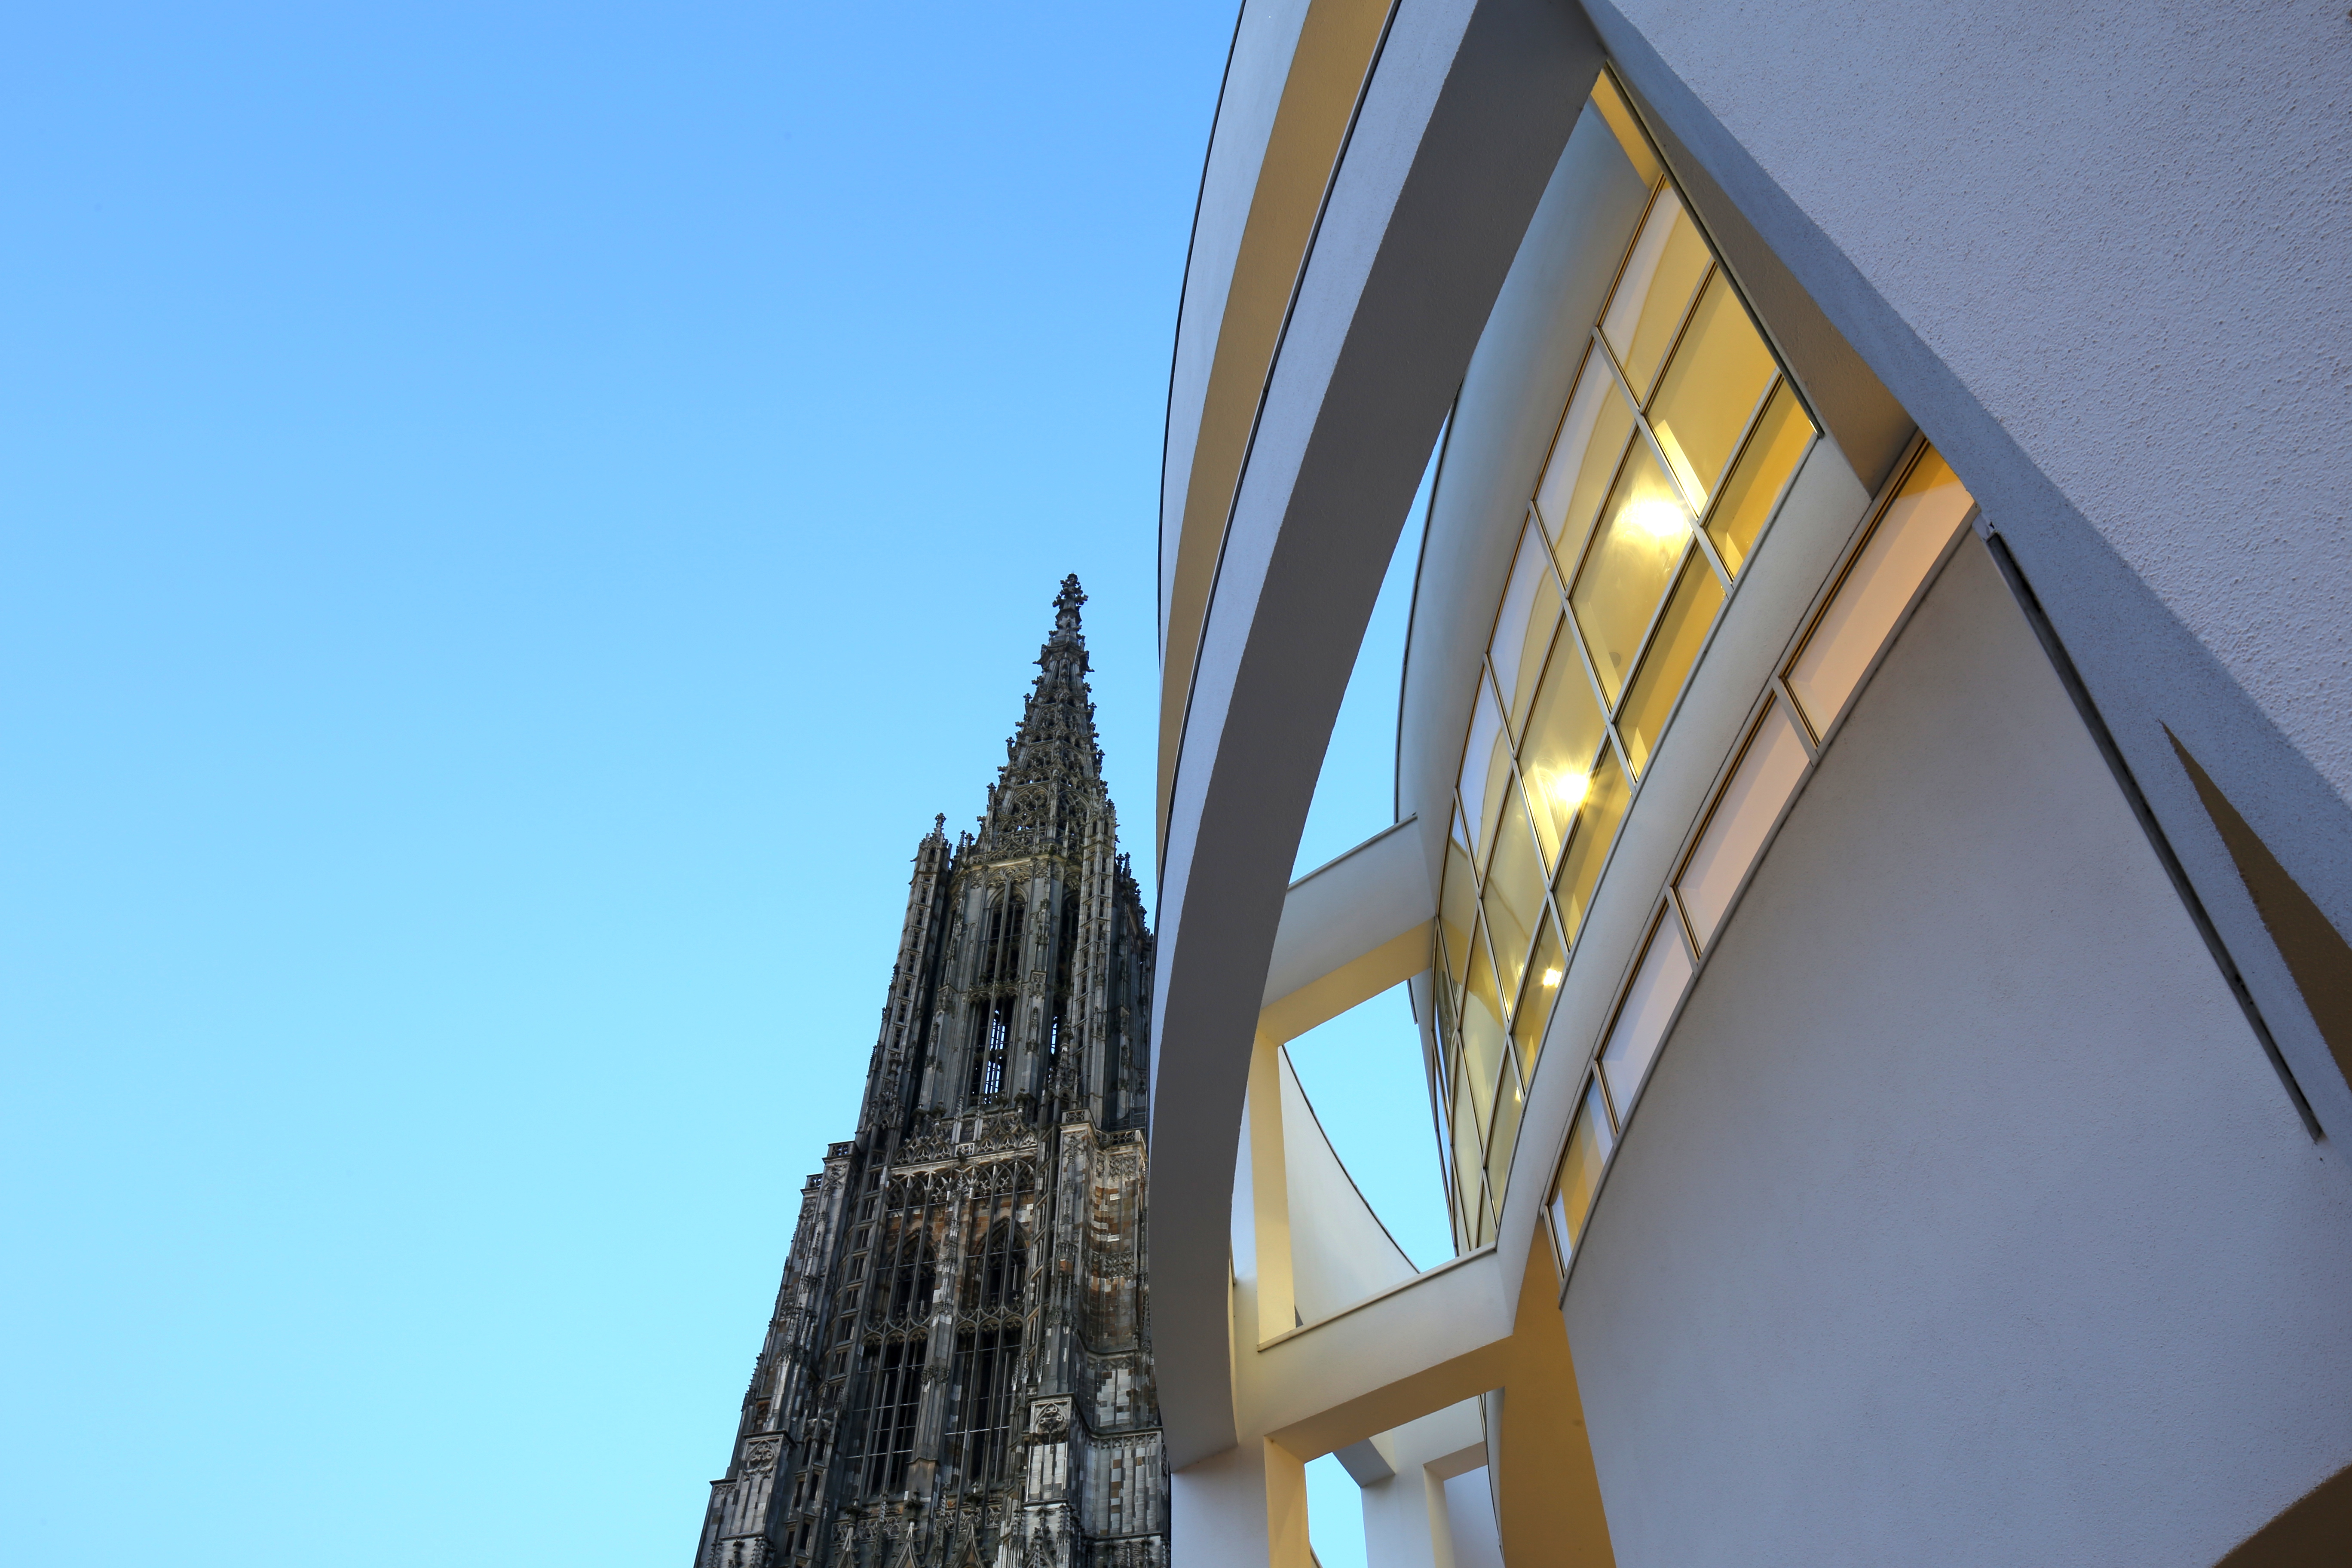 Stadthaus and Ulm Minster